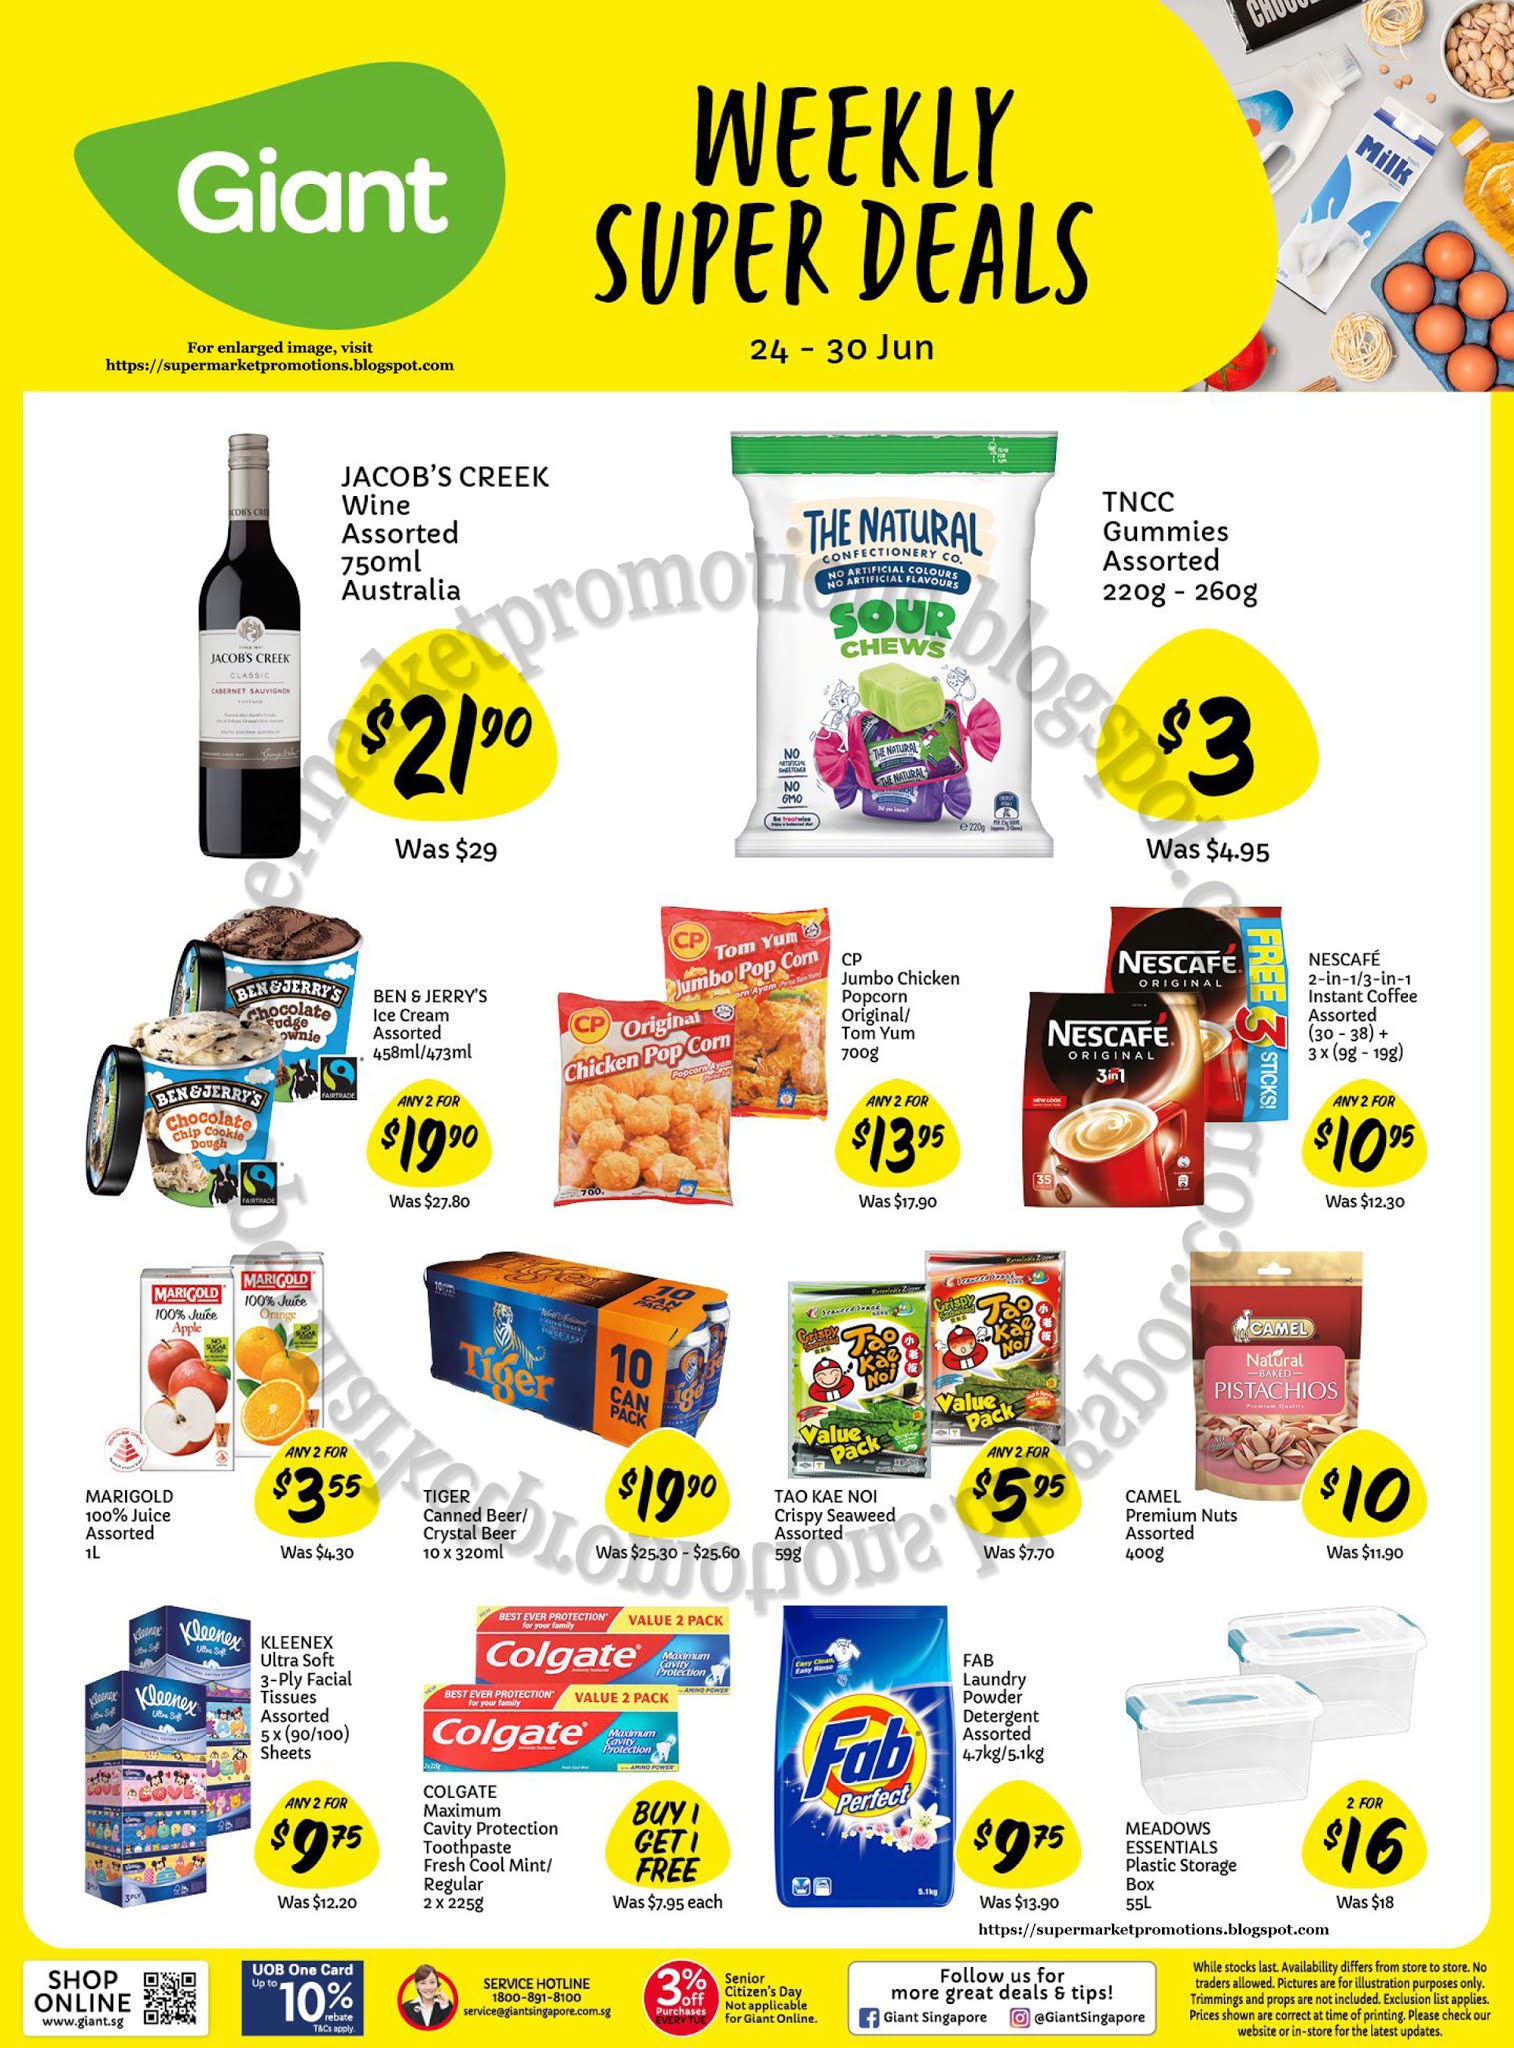  Giant  Weekly  Super Deals Promotion  24 30 June 2022 